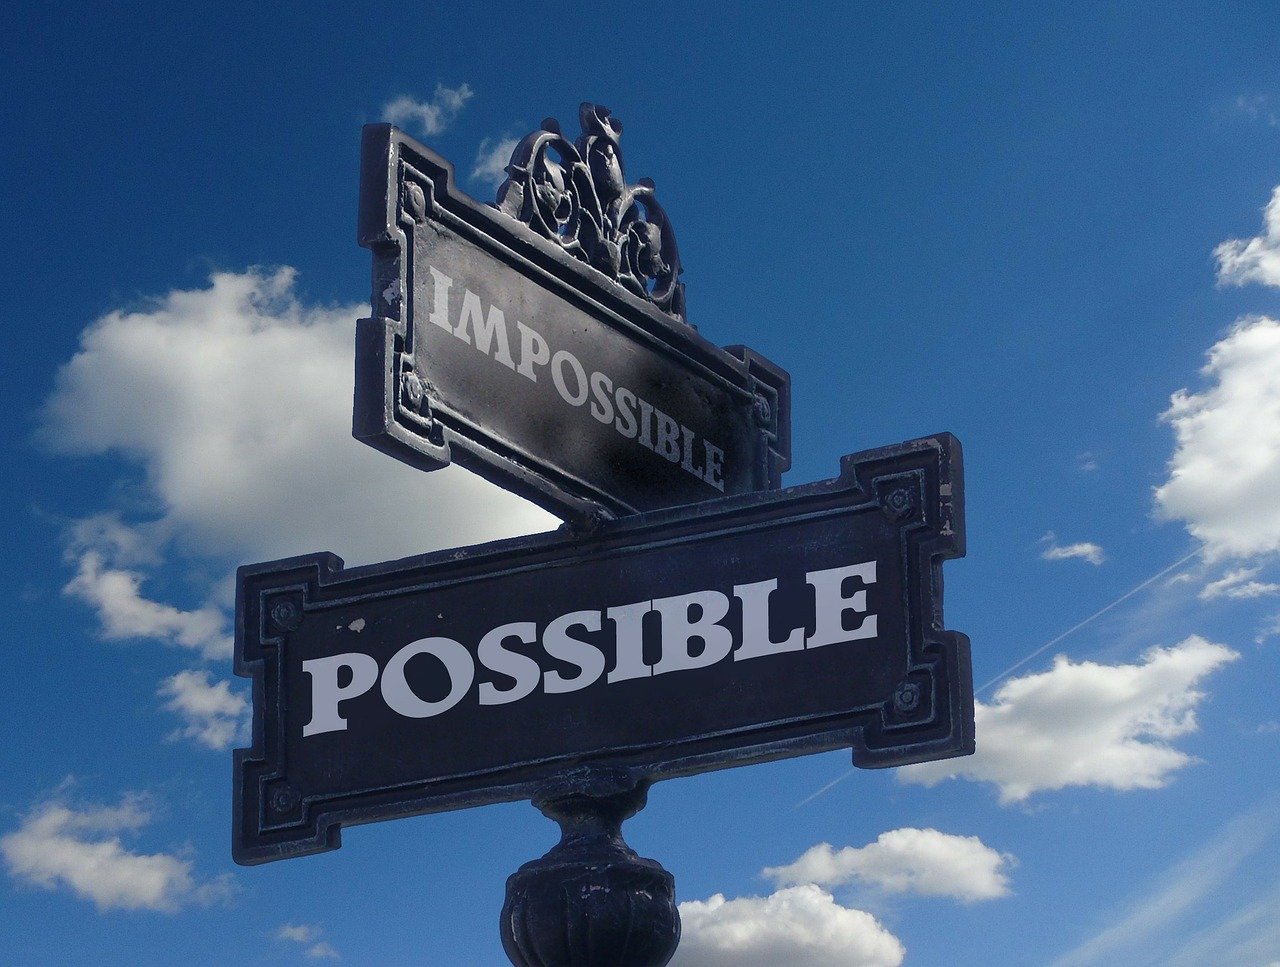 An image of a street sign with "possible" and "impossible" being the intersection.